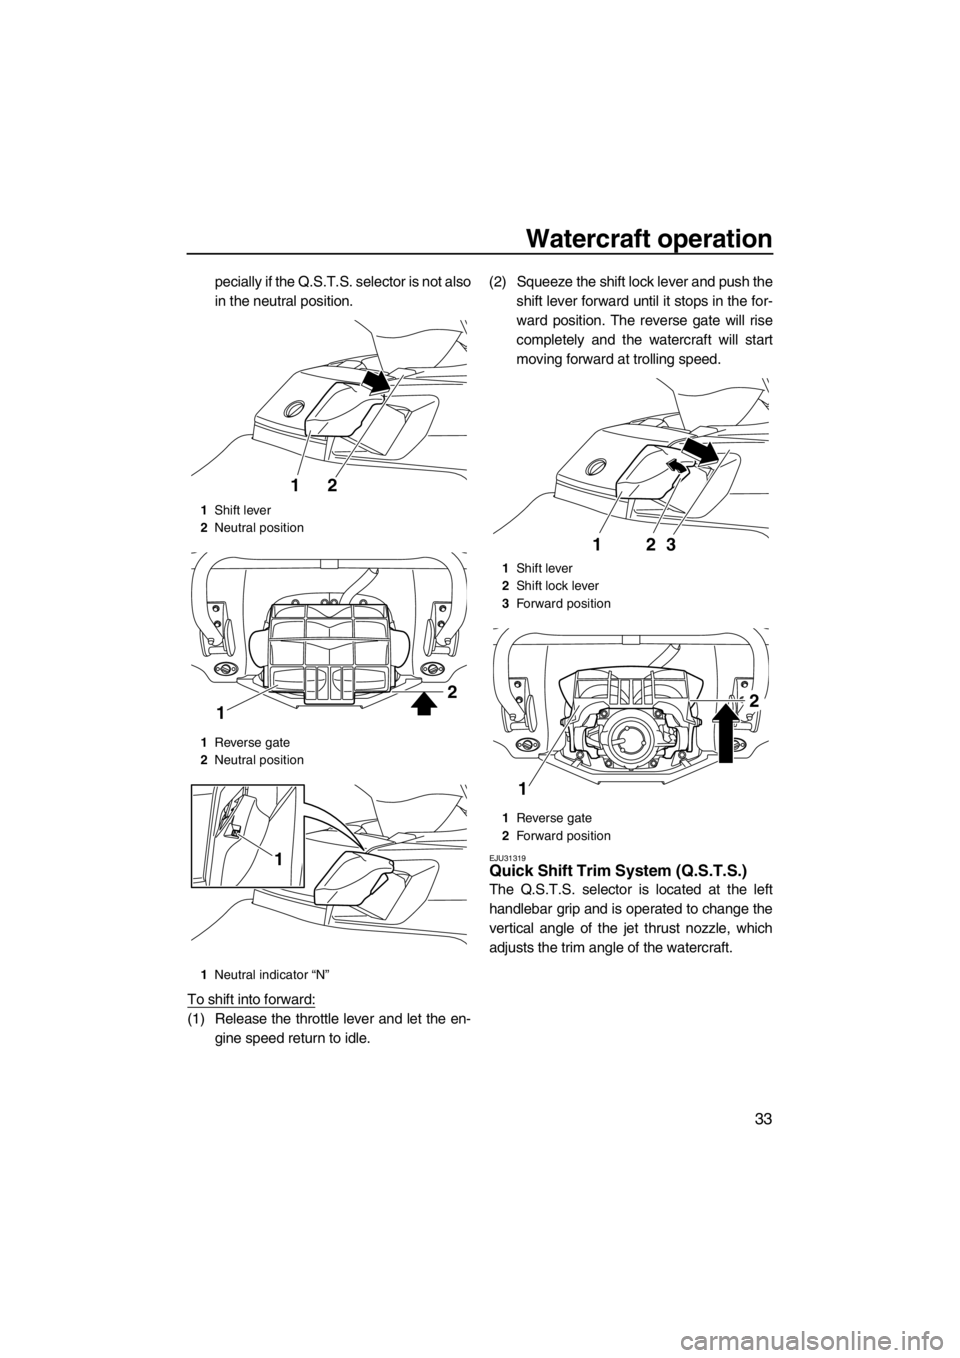 YAMAHA FX HO CRUISER 2012 Owners Guide Watercraft operation
33
pecially if the Q.S.T.S. selector is not also
in the neutral position.
To shift into forward:
(1) Release the throttle lever and let the en-
gine speed return to idle.(2) Squee